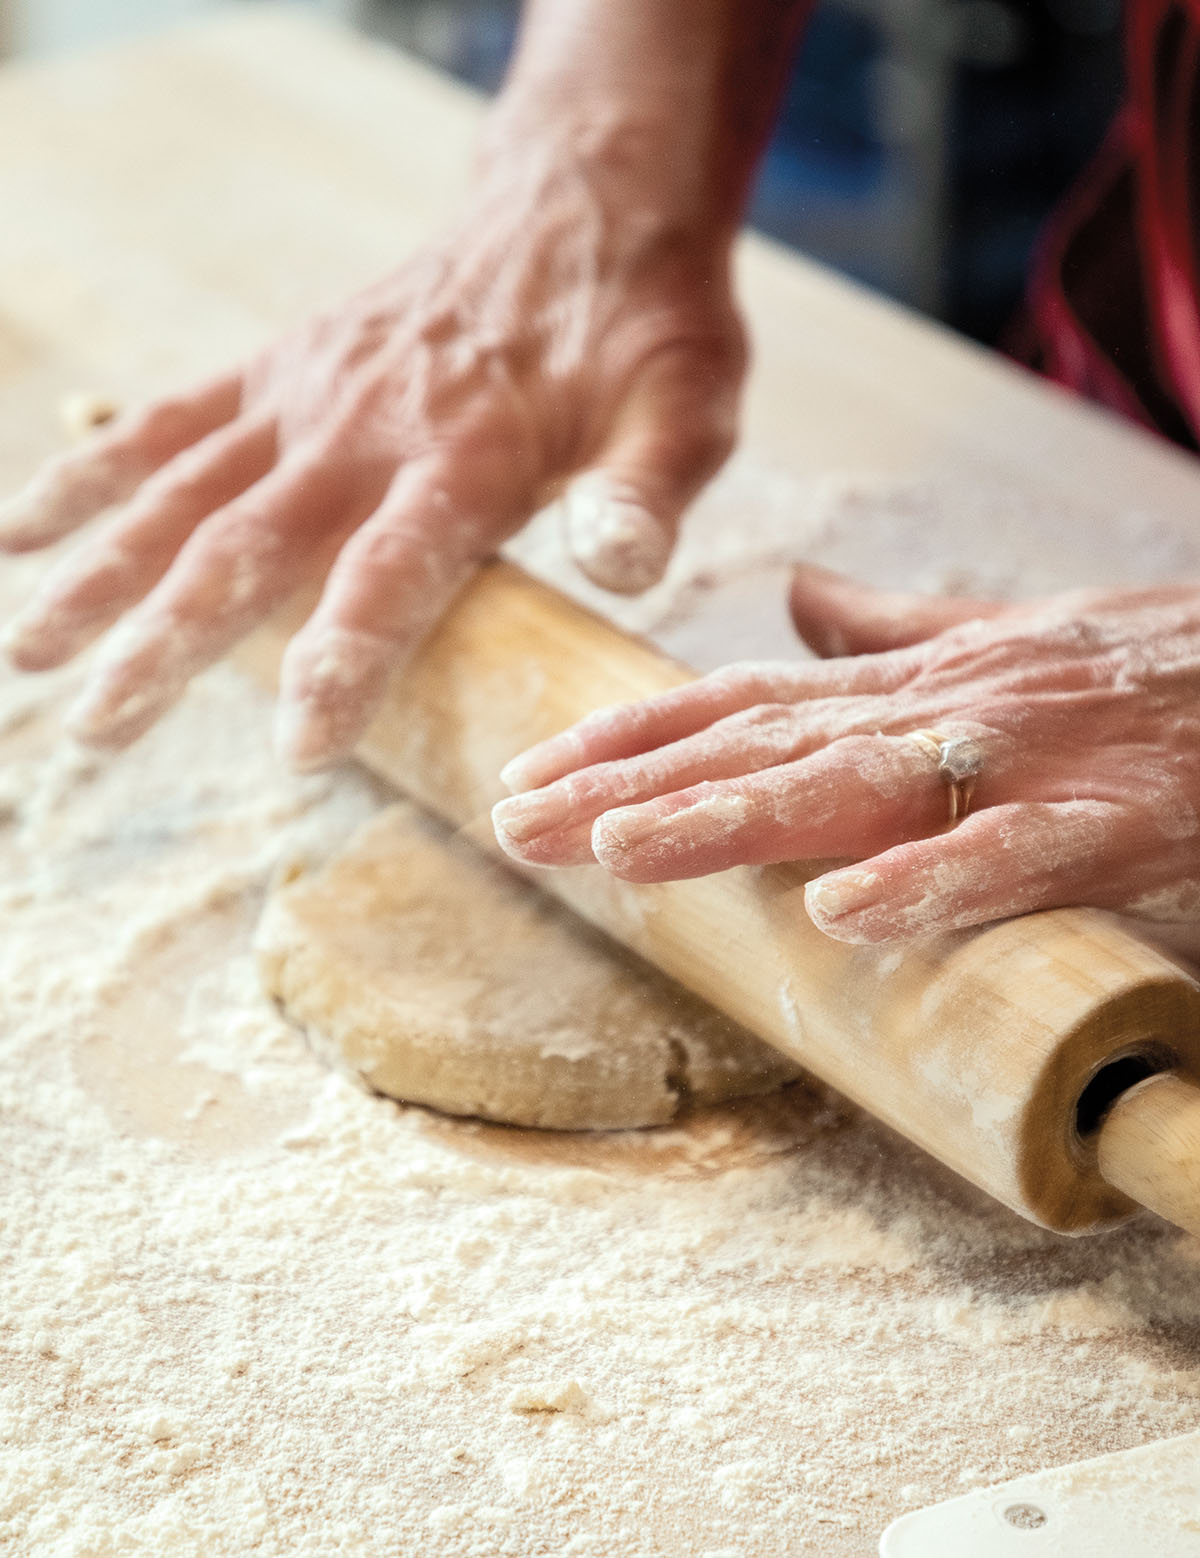 A person's flour-covered hands push a wooden rolling pin over a block of brown dough